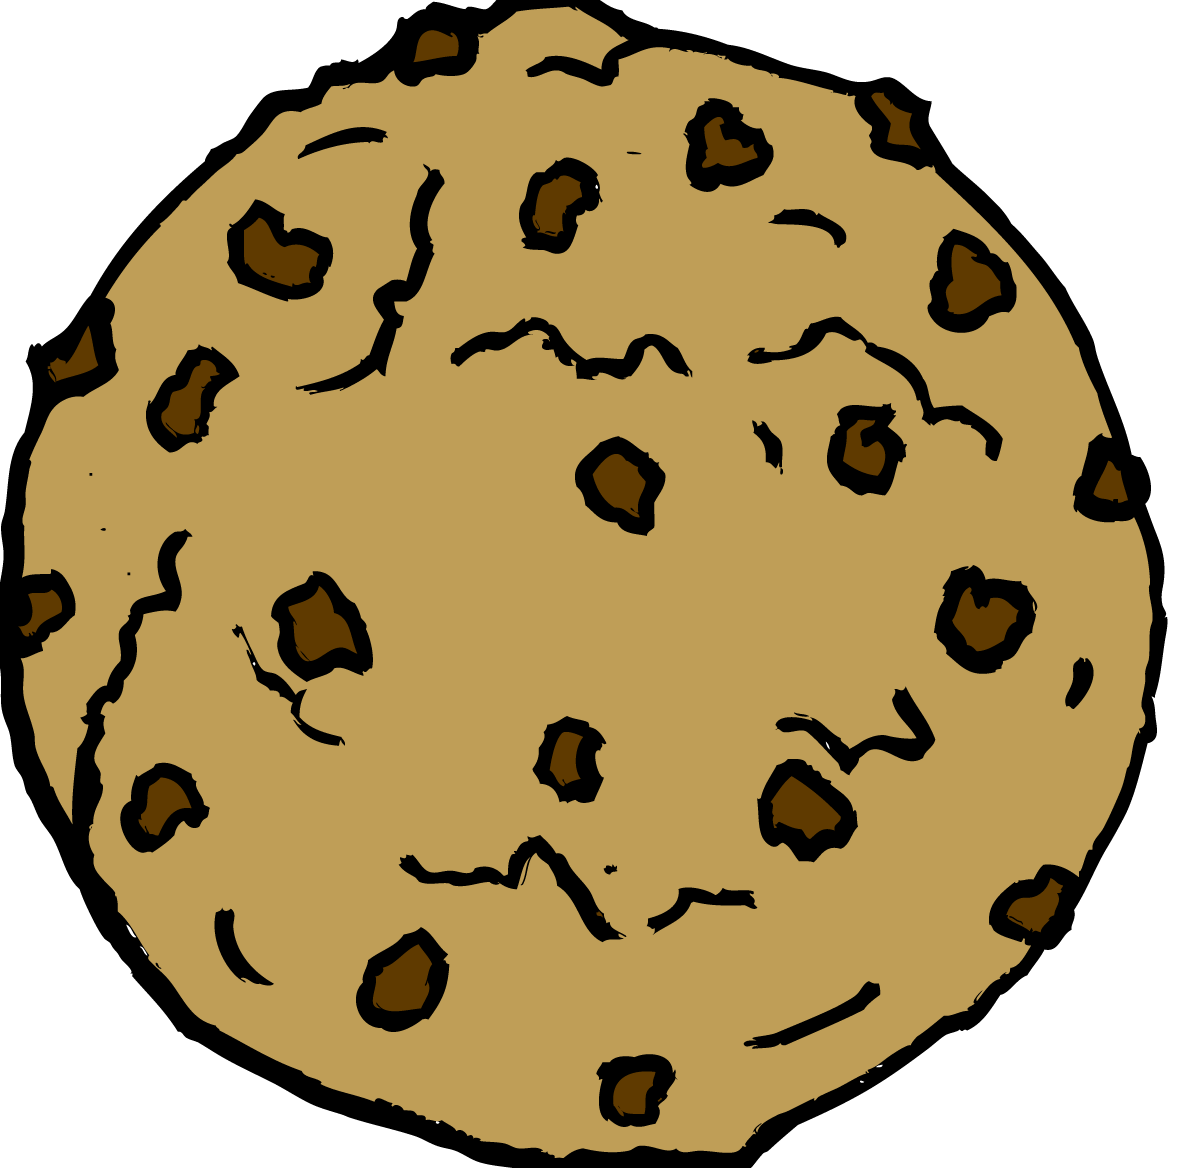 Chocolate Chip Cookie Clipart - Chocolate Chip Cookie Clip Art